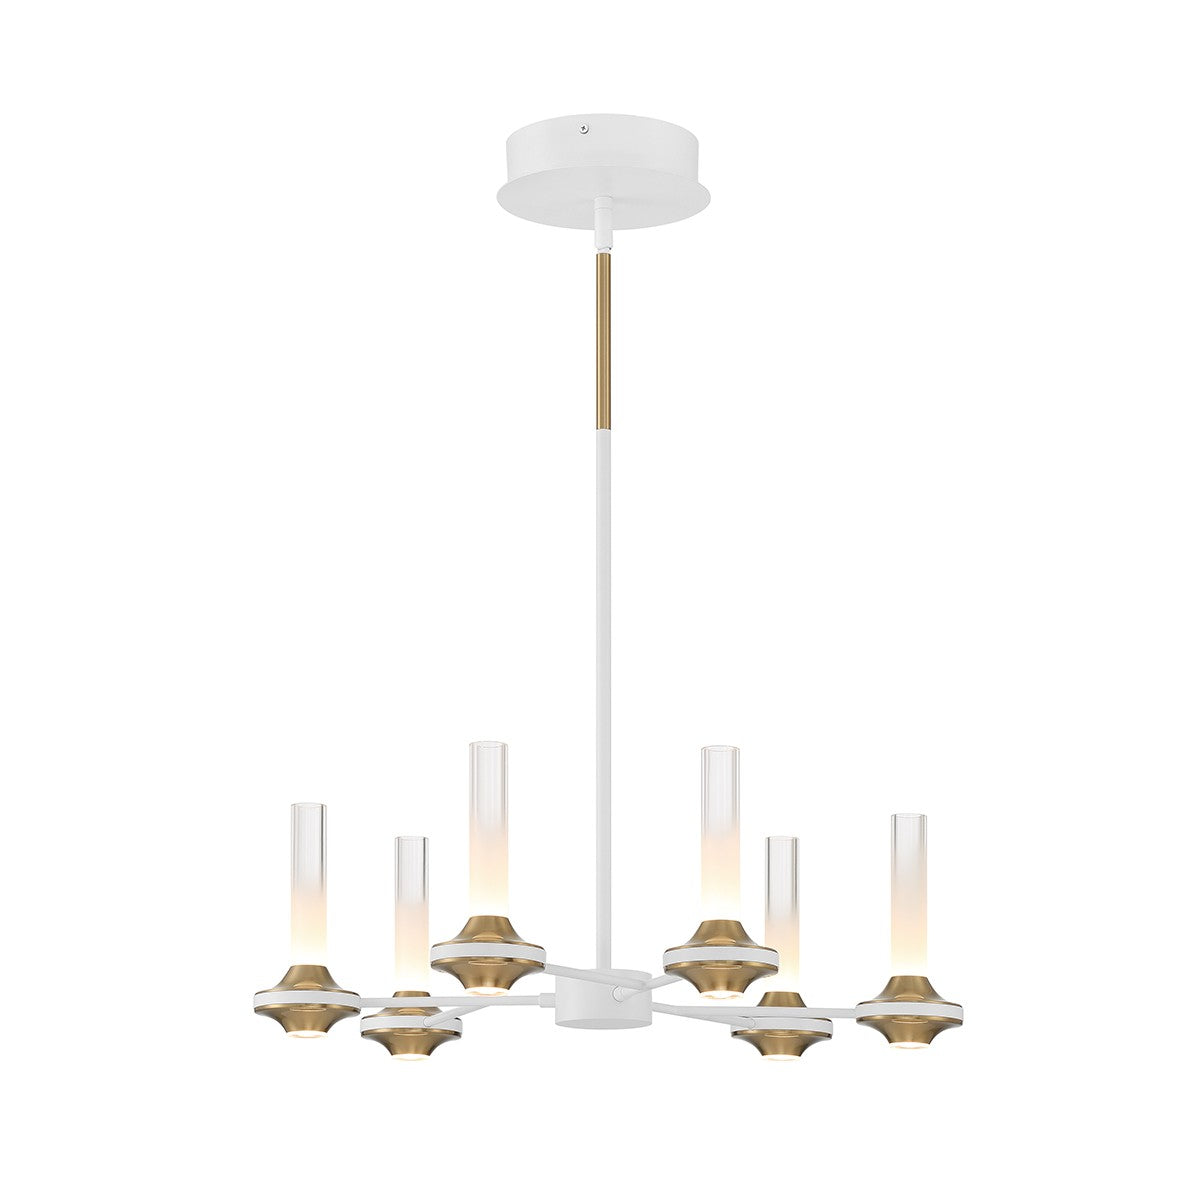 Eurofase Canada - 45712-029 - LED Chandelier - Torcia - White and Brass